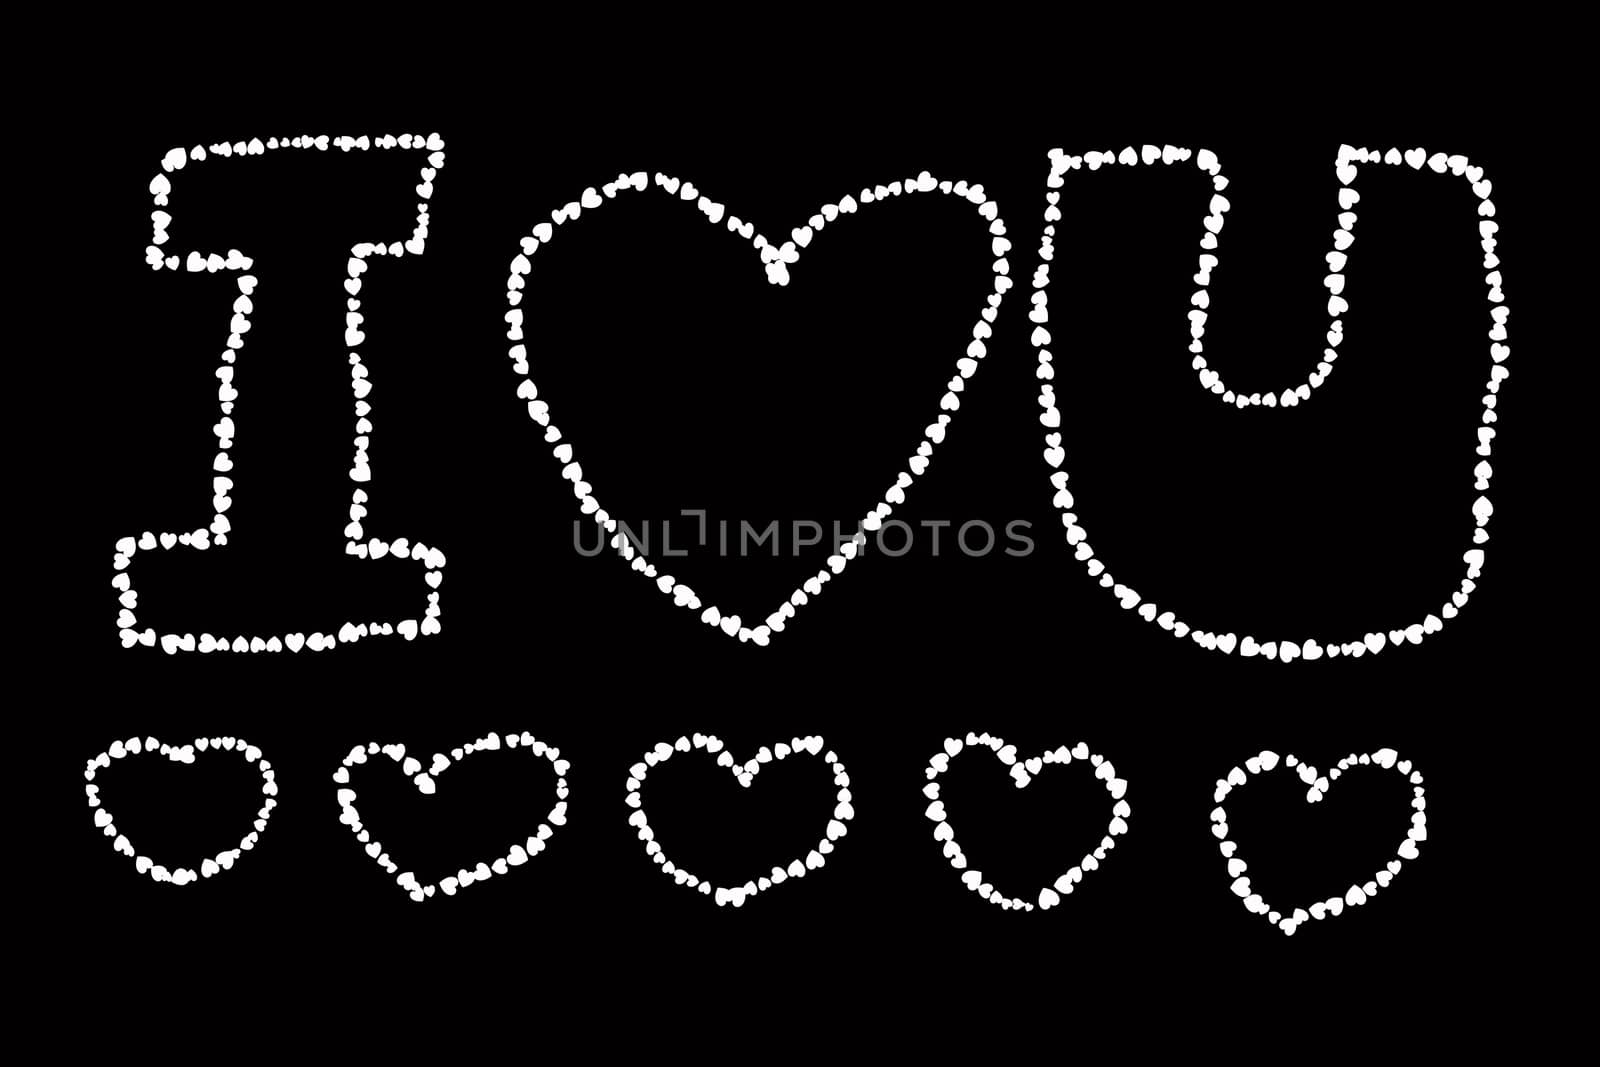 white word i love you made of heart shapes isolated on black background.